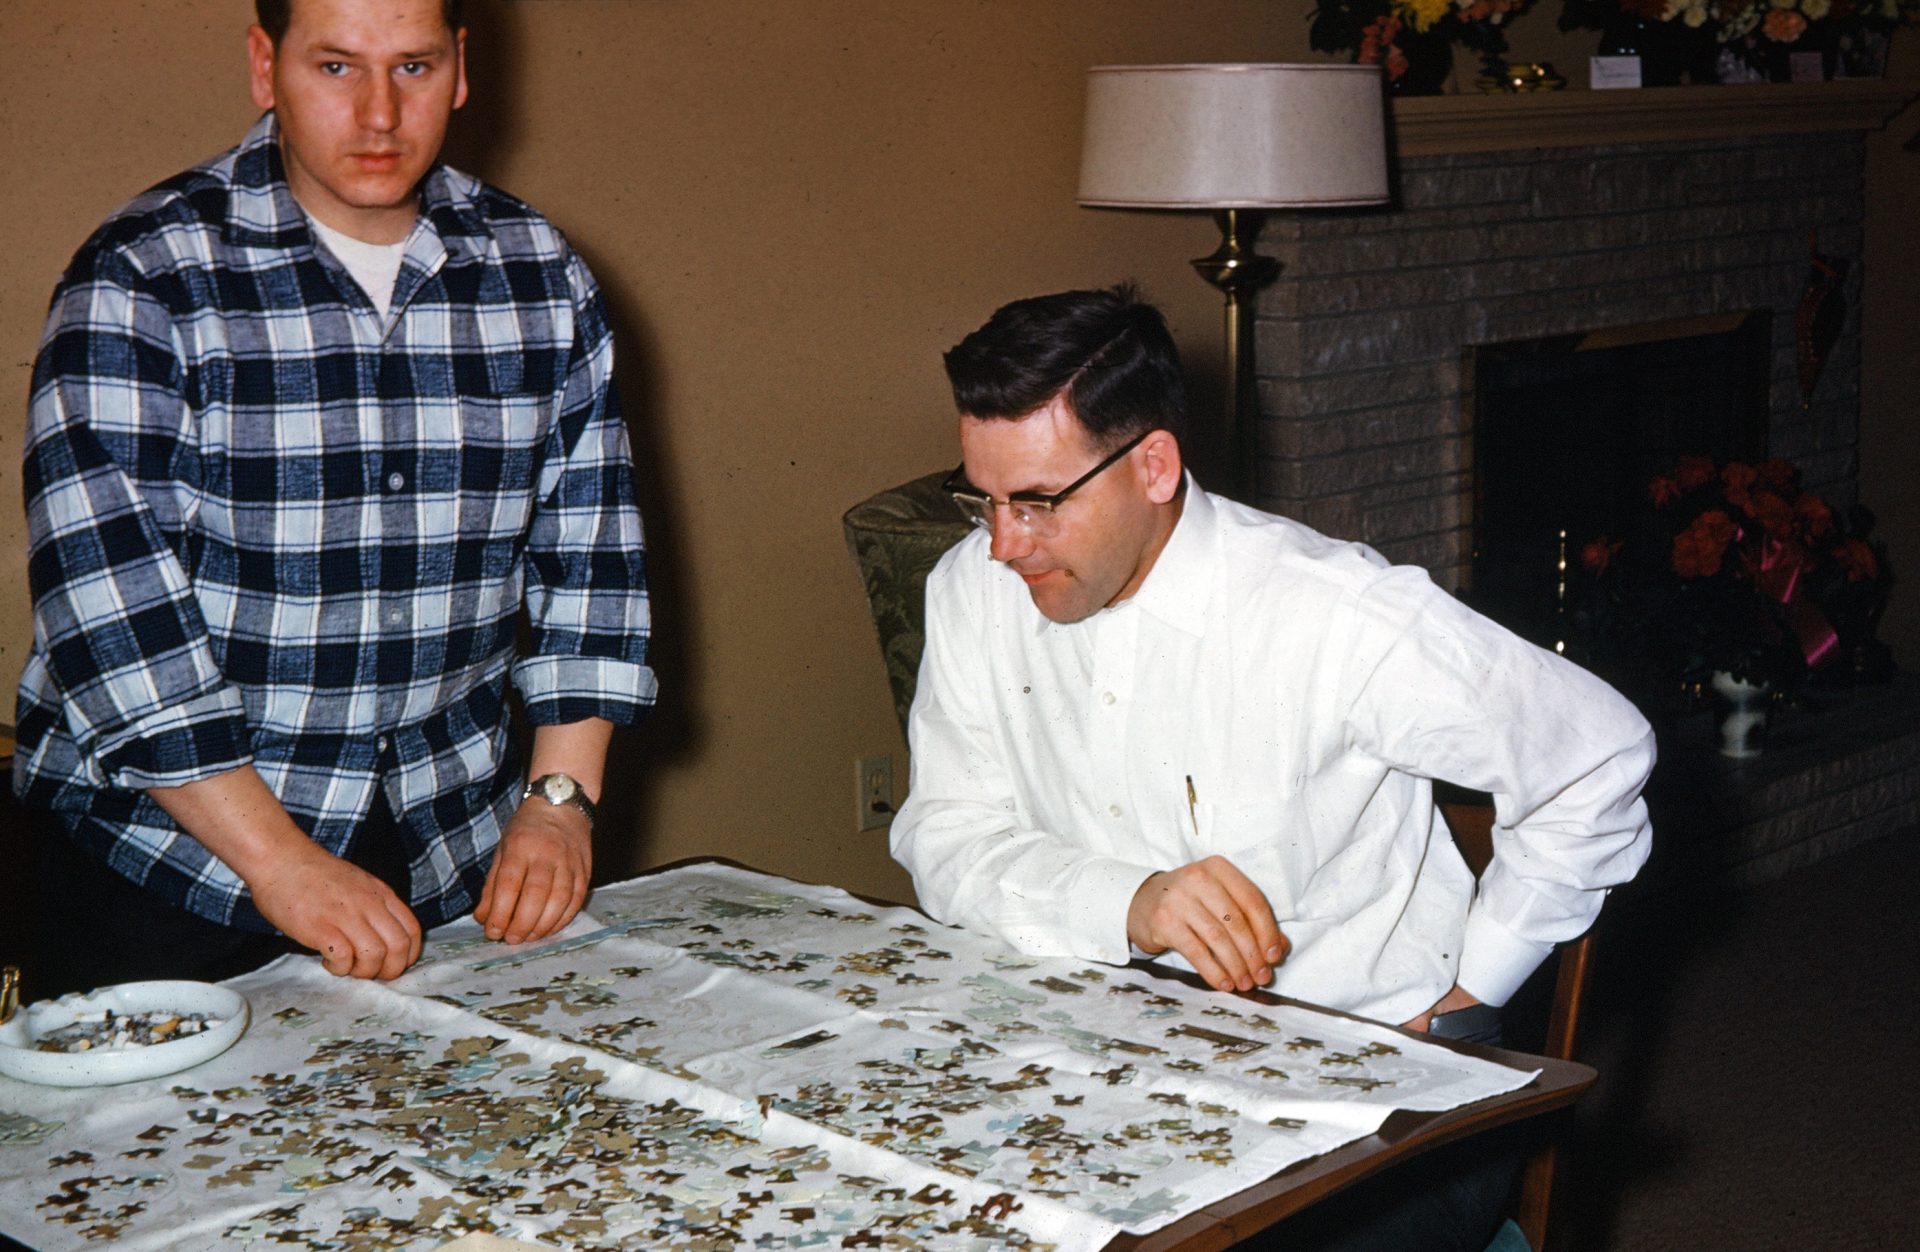 Brothers; Bob and David putting together a puzzle at "Grandma's house".